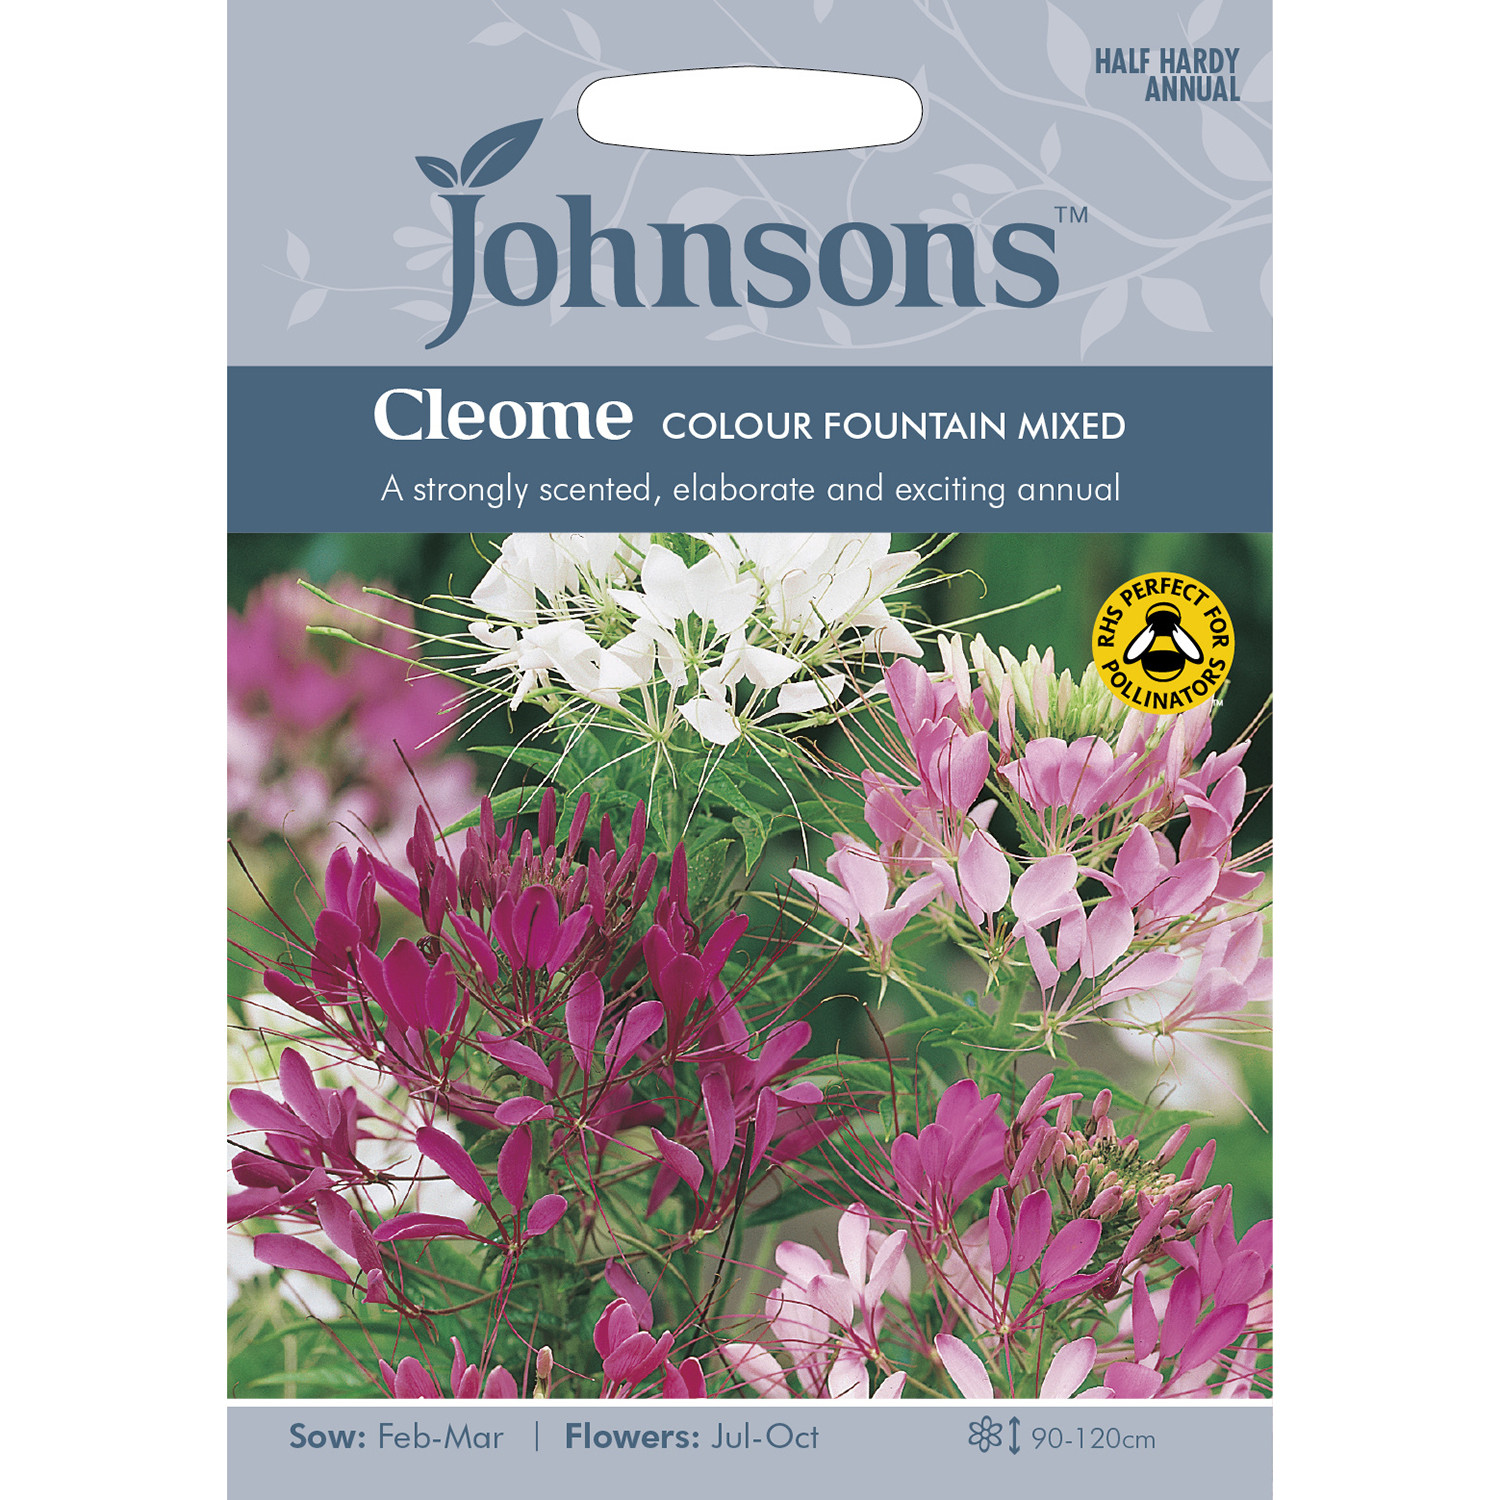 Johnsons Cleome Colour Fountain Mixed Flower Seeds Image 2